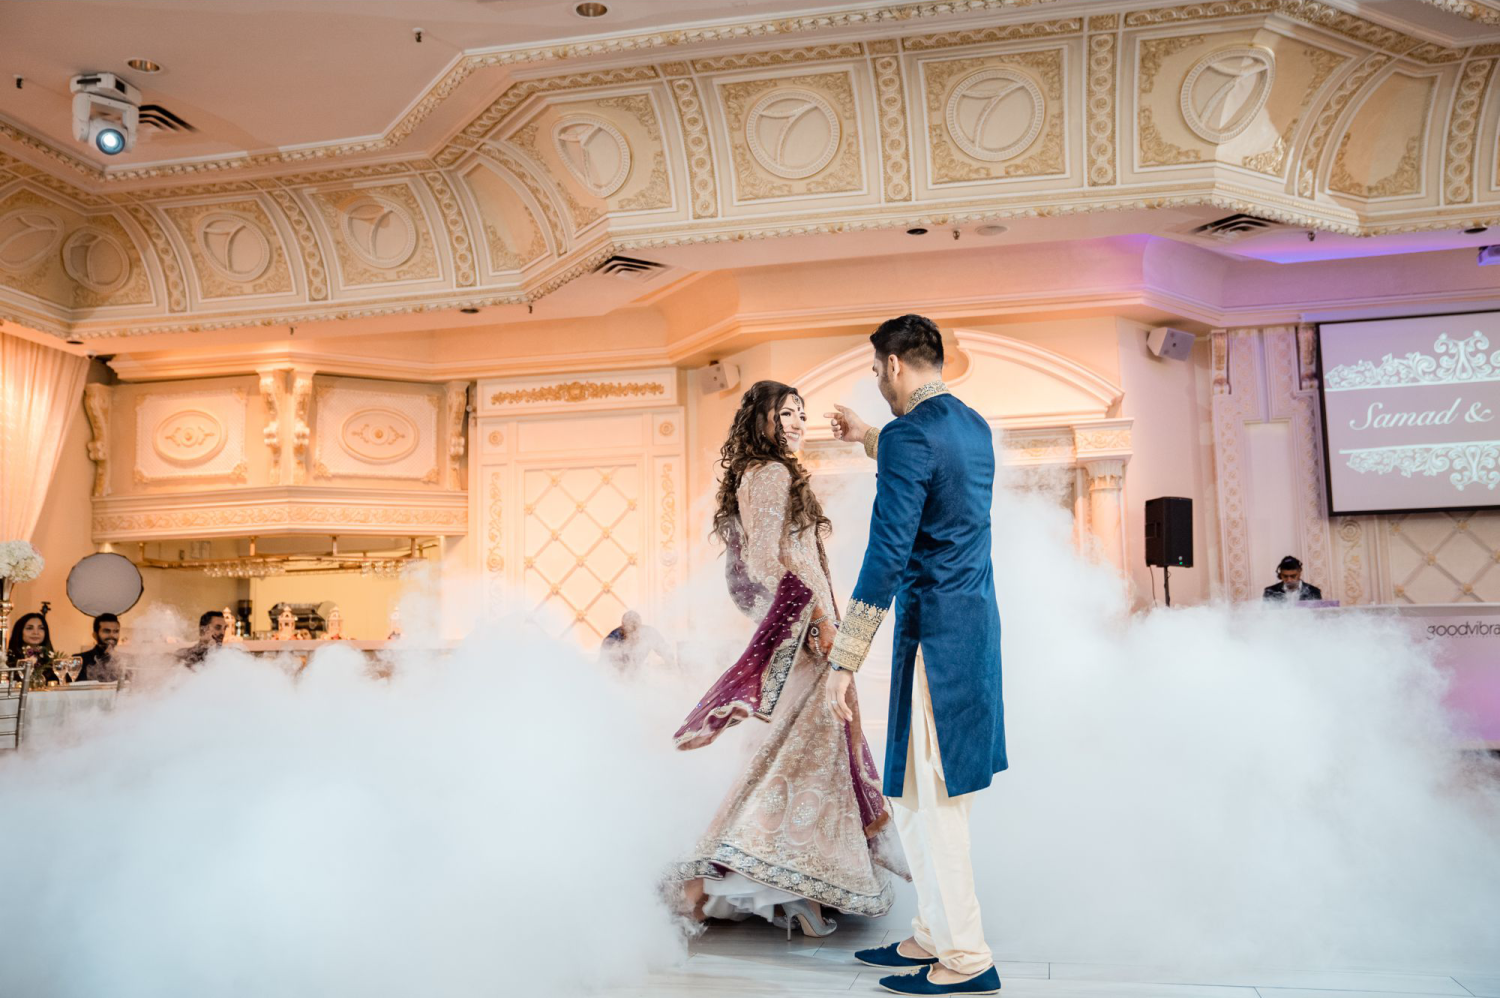 A wedding couple dancing while surrounded by smoke from dry ice. Taken by M+M Photography from Dina + Sam's wedding photos. Attribution: https://www.mandmphotography.ca/2018/10/dina-sam-liberty-grand-paradise-banquet-hall-wedding-toronto-vaughan/